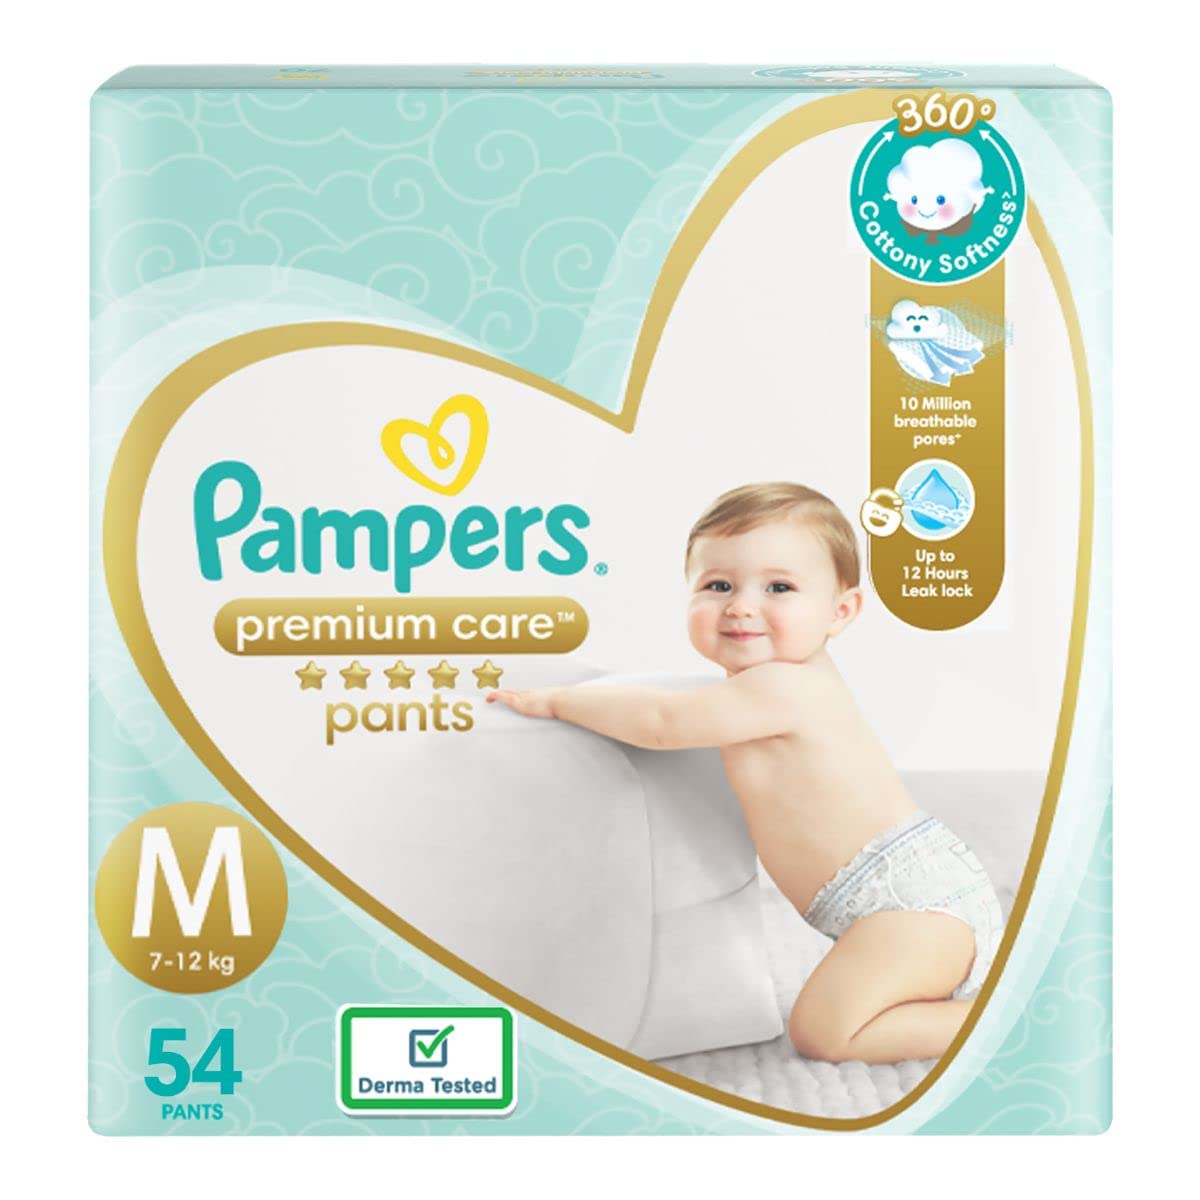 pampers sleep and play vs active baby